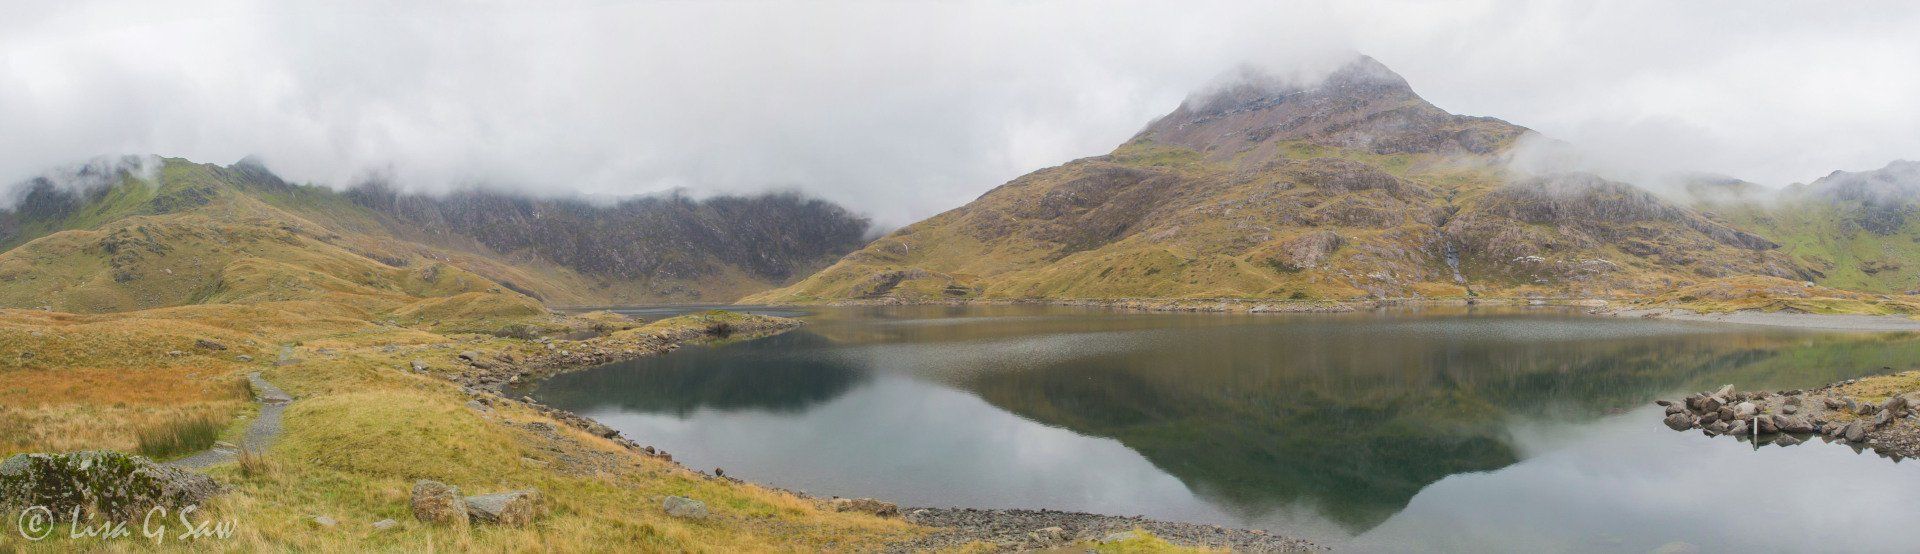 Llyn Llydaw and low clouds in Snowdonia National Park